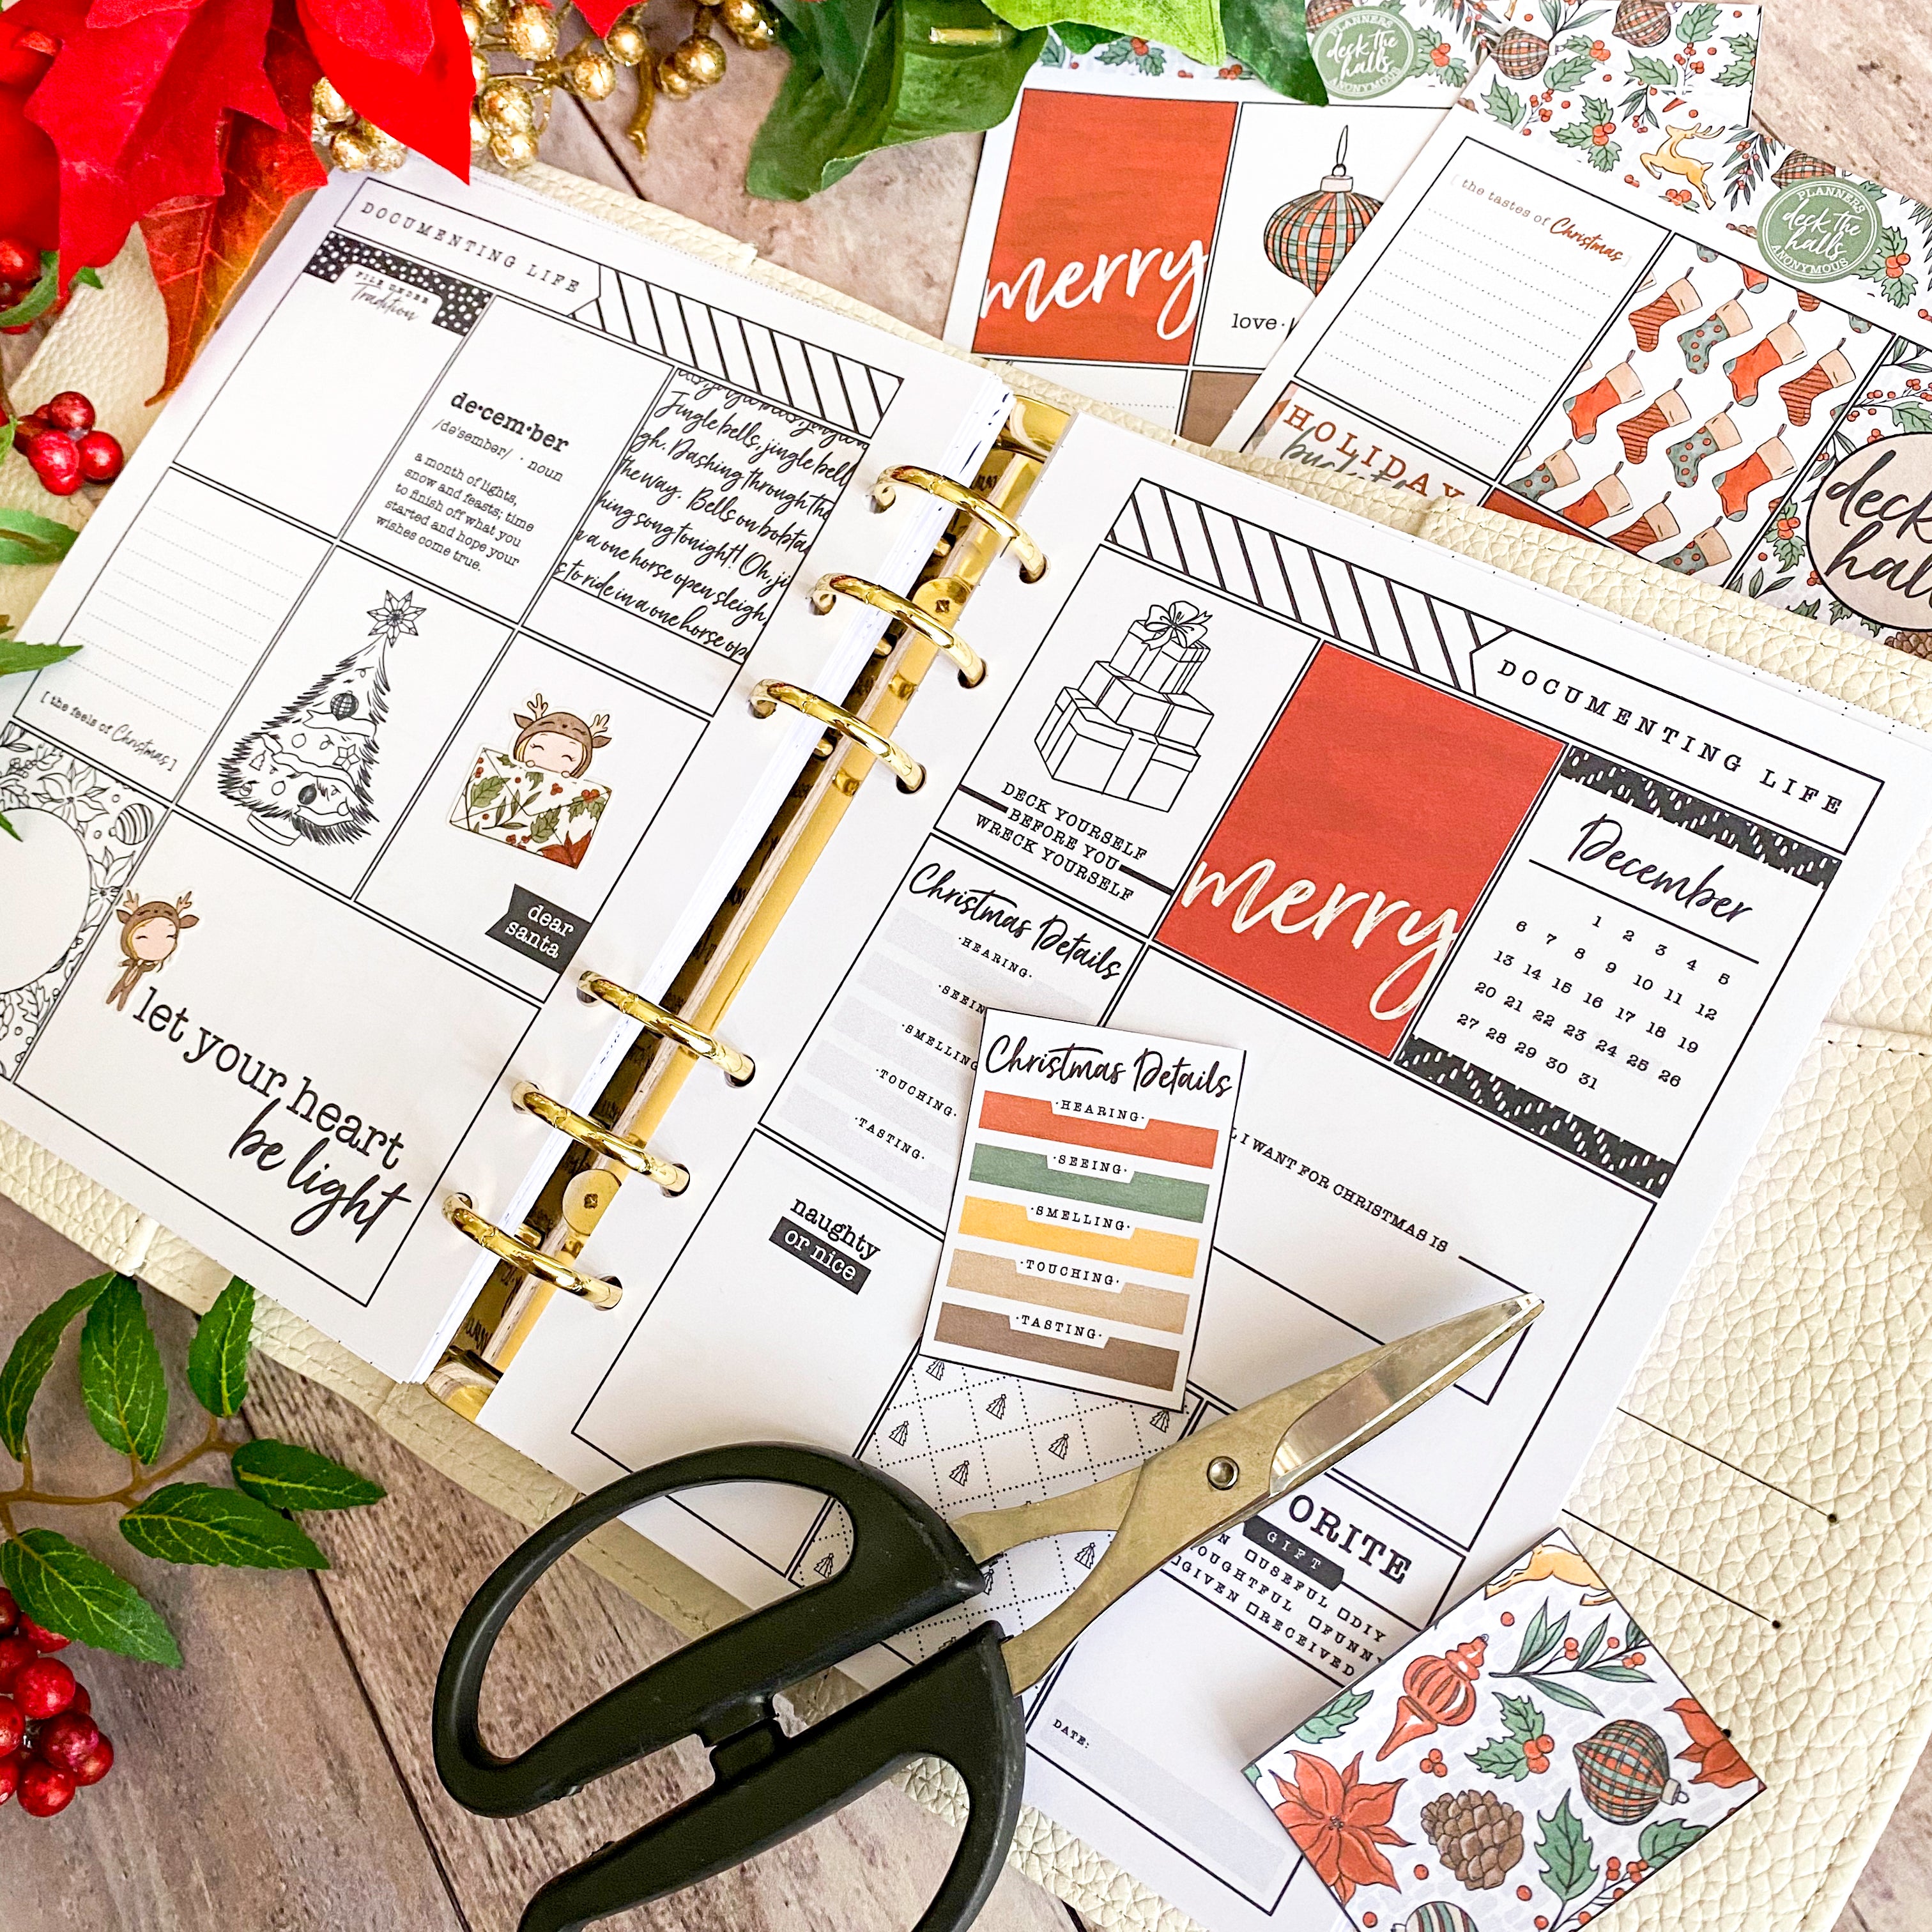 Deck the Halls Documenting Life in Colour Printable